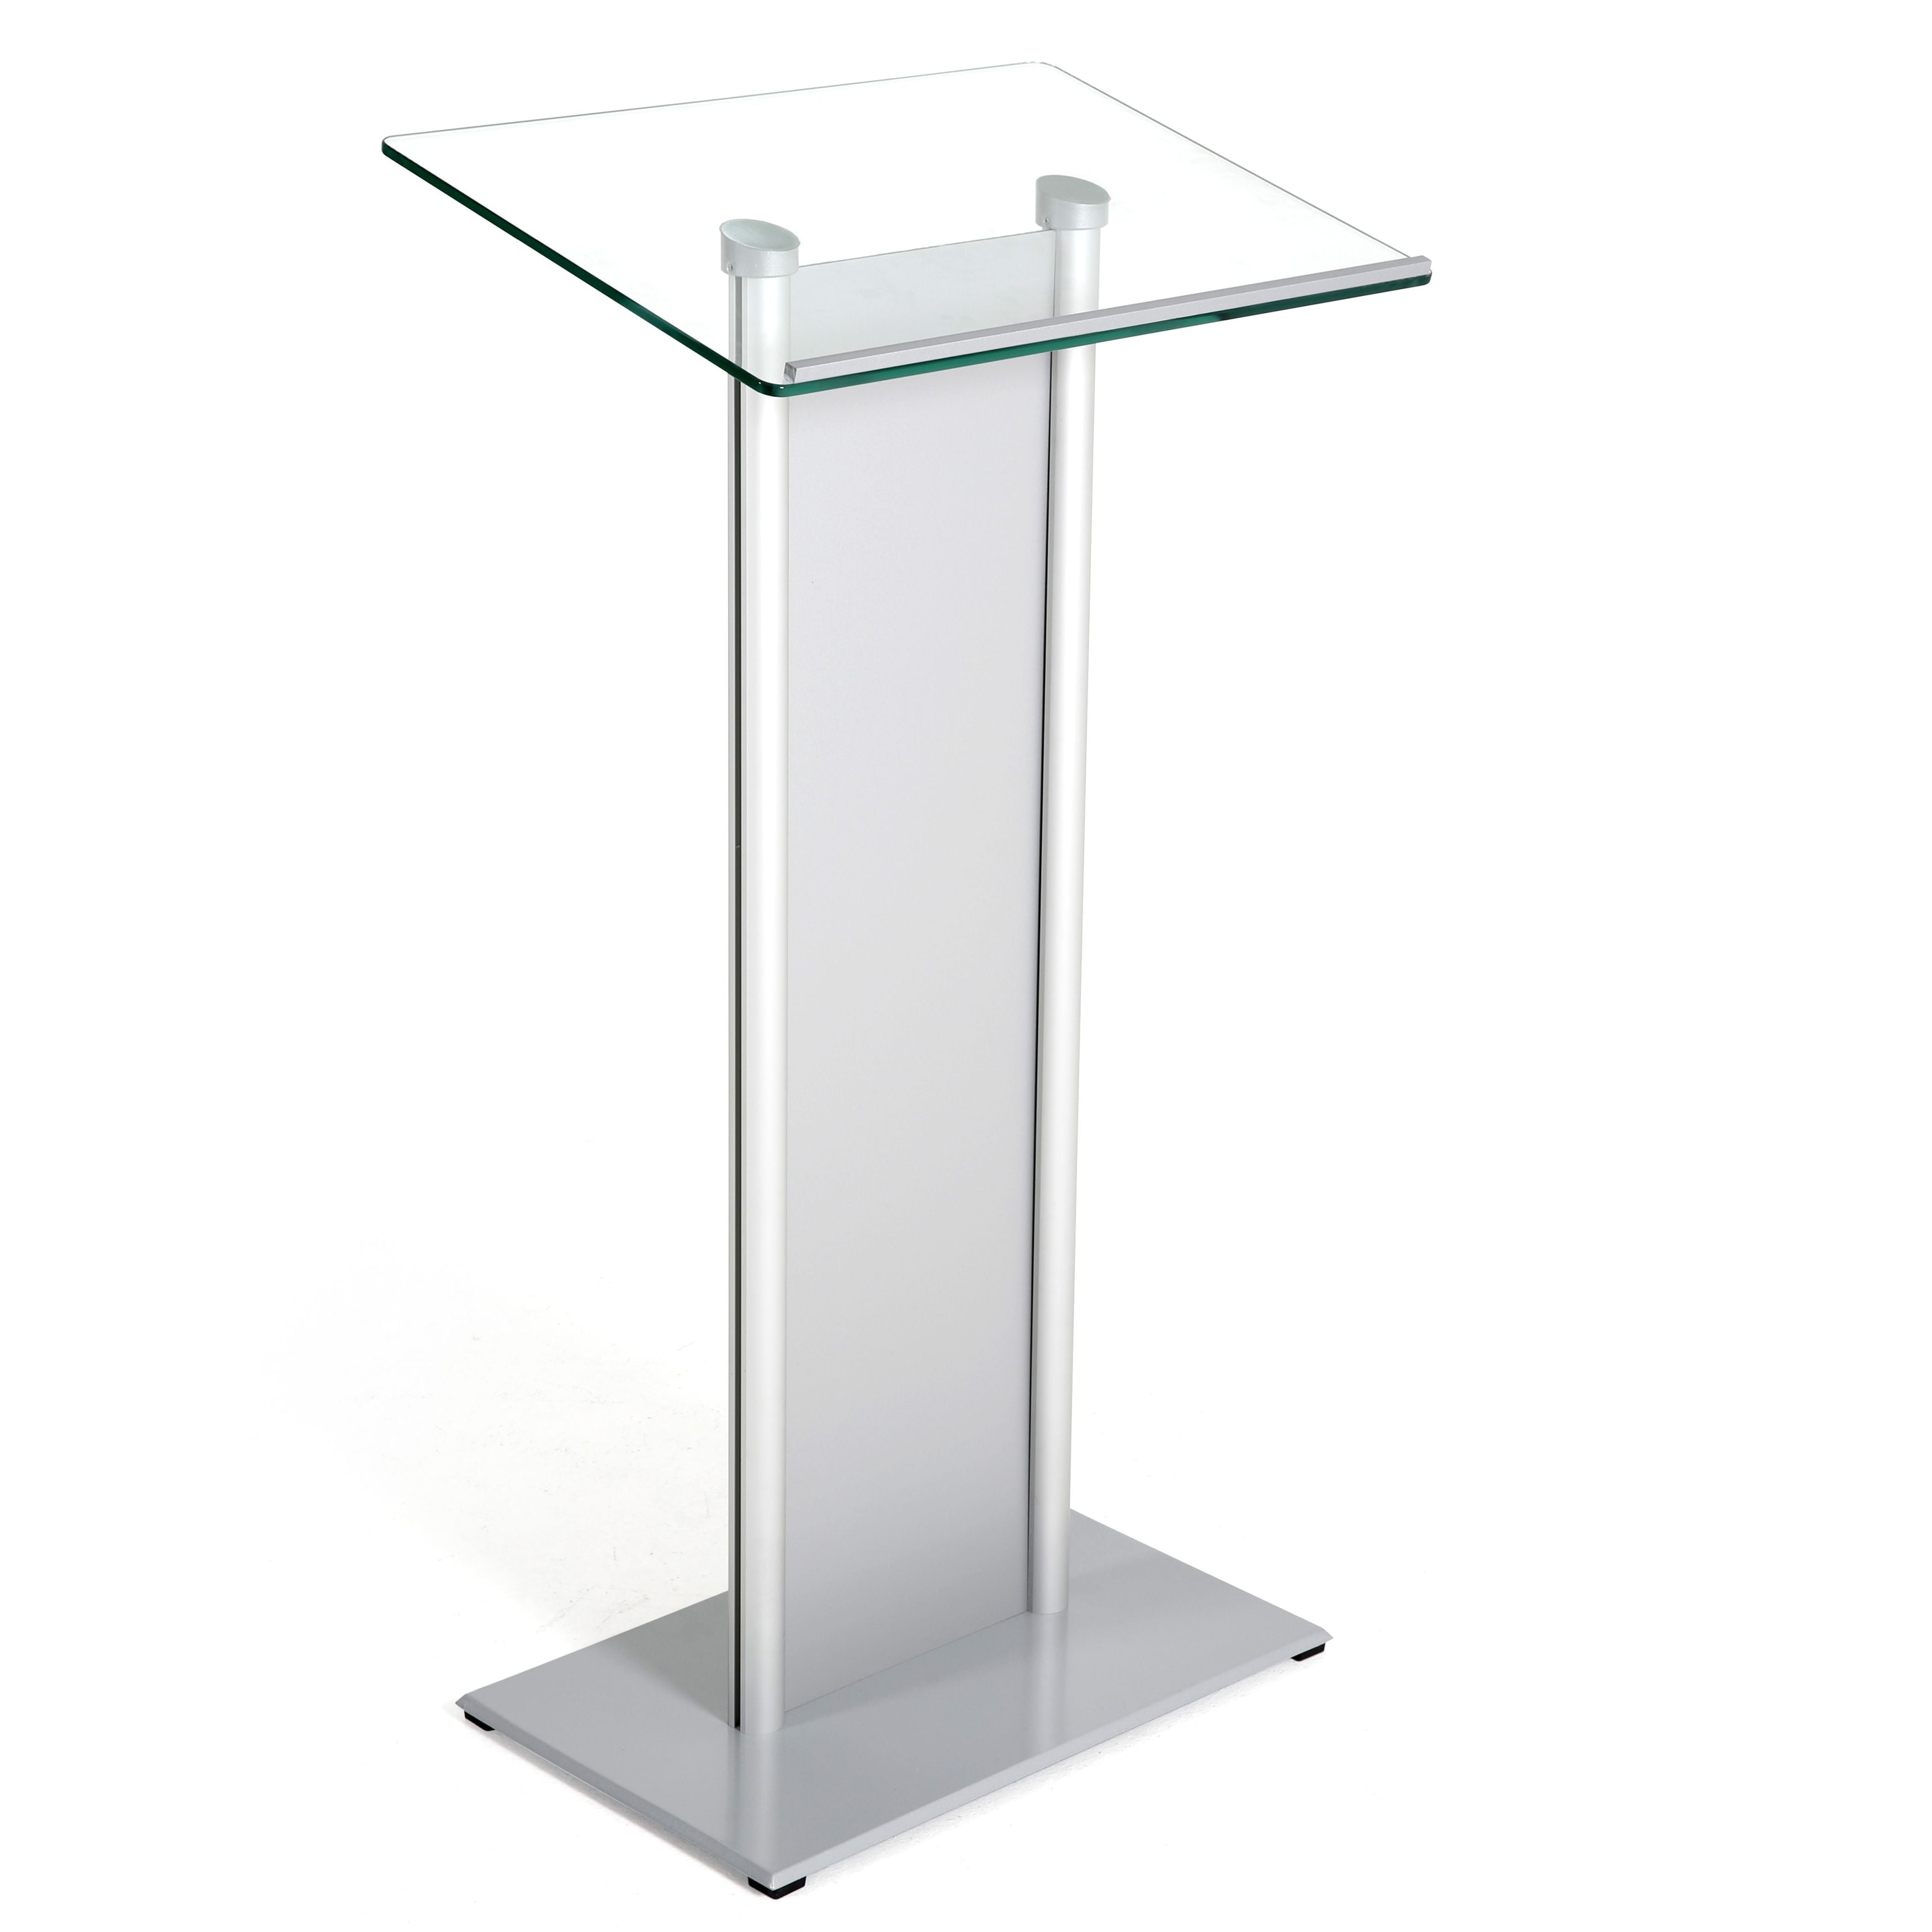 Acrylic Lectern with Mahogany Accent Panels 1-Inch Lip On Podium Surface Easy to Assemble Includes Removable Shelf Hardware Included 45-34 H x 23-1/2 W 